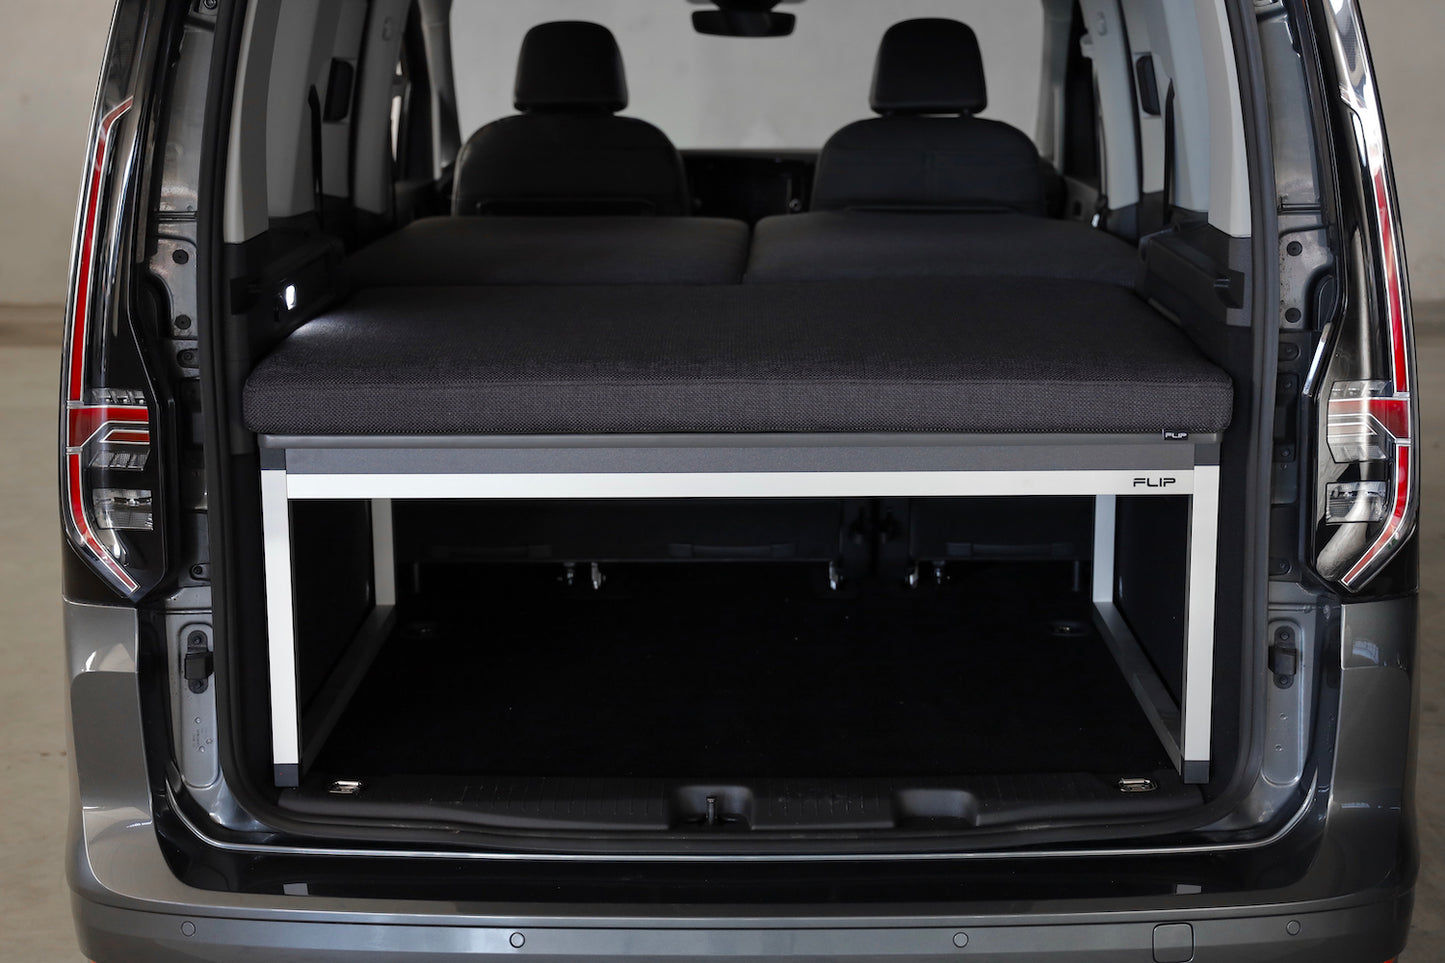 Ford Tourneo Grand Connect (2013→) adventure bed